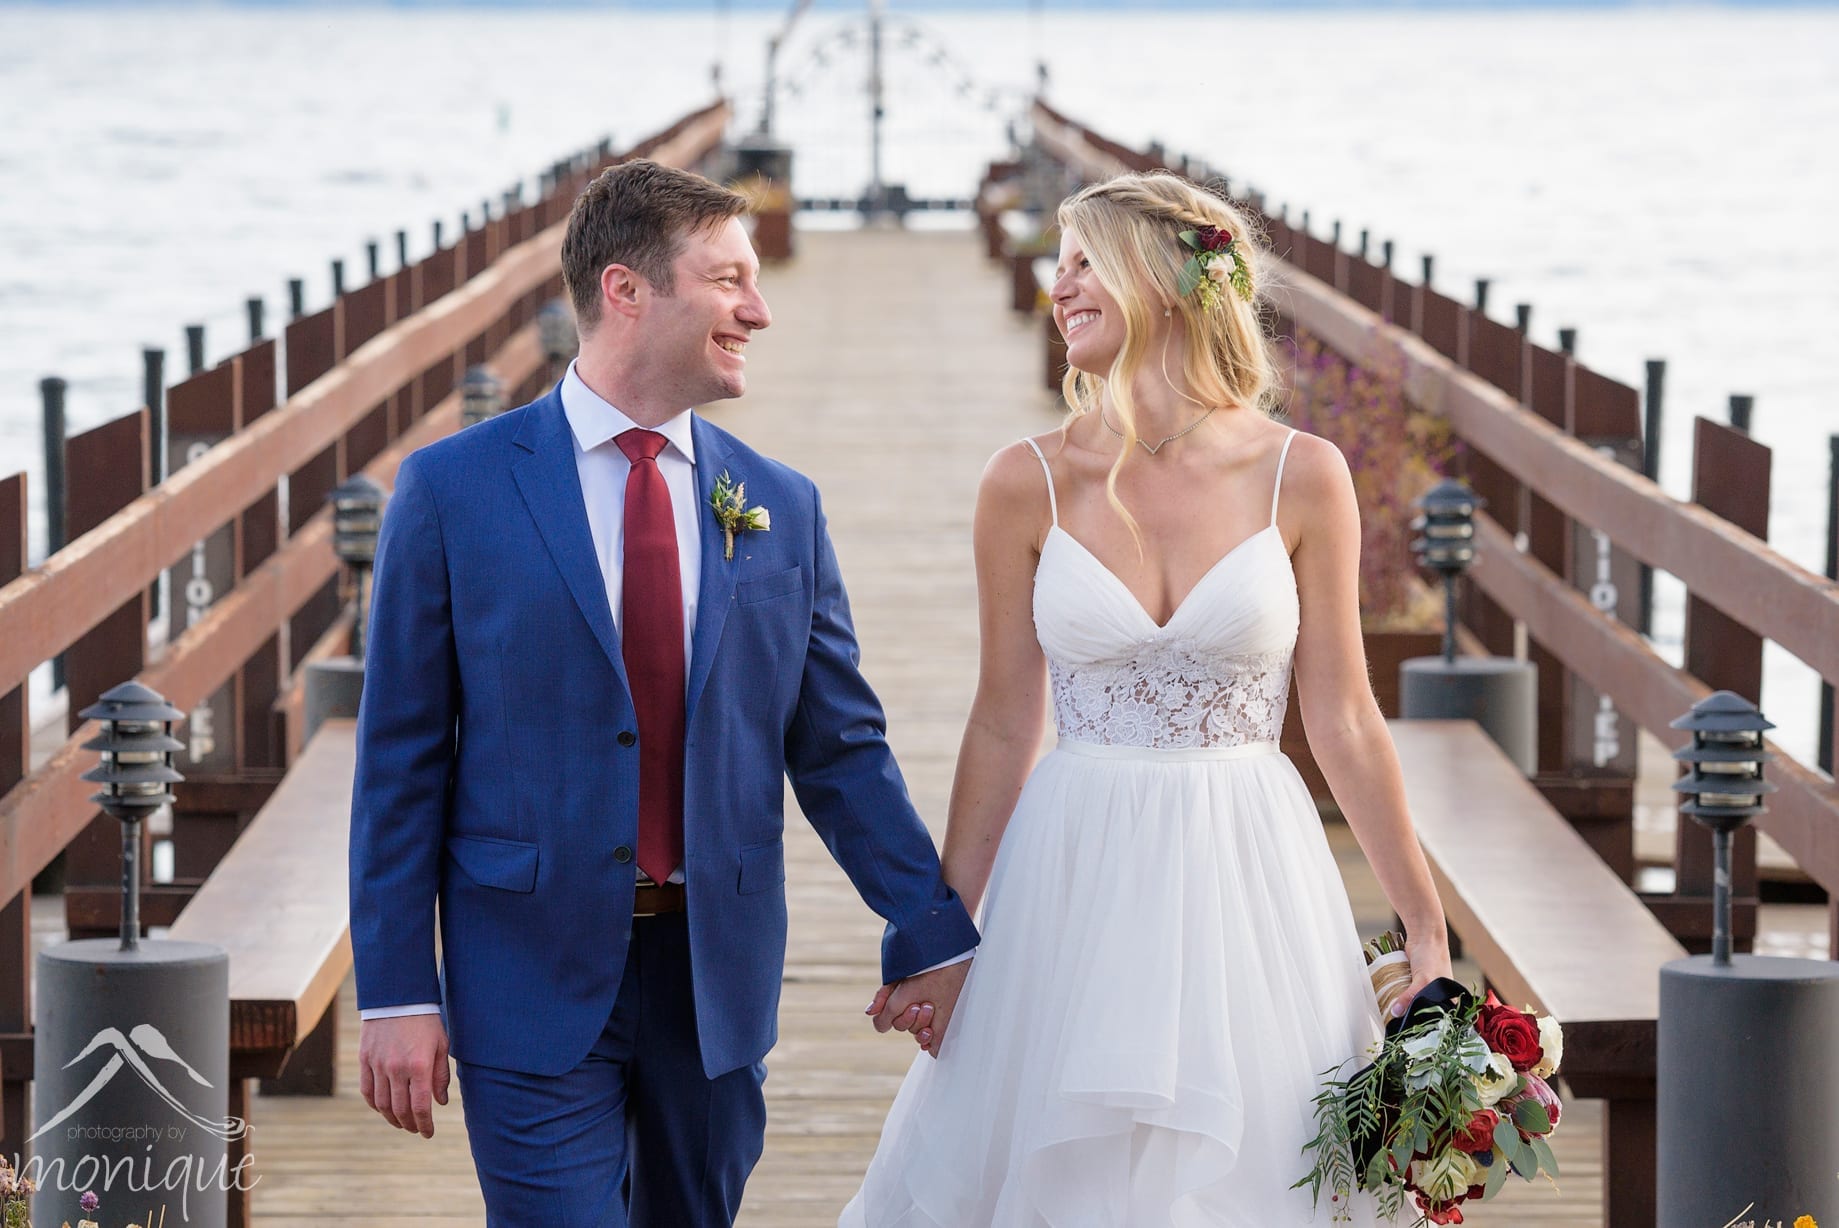 Gar Woods wedding photography with the bride and groom walking on the pier